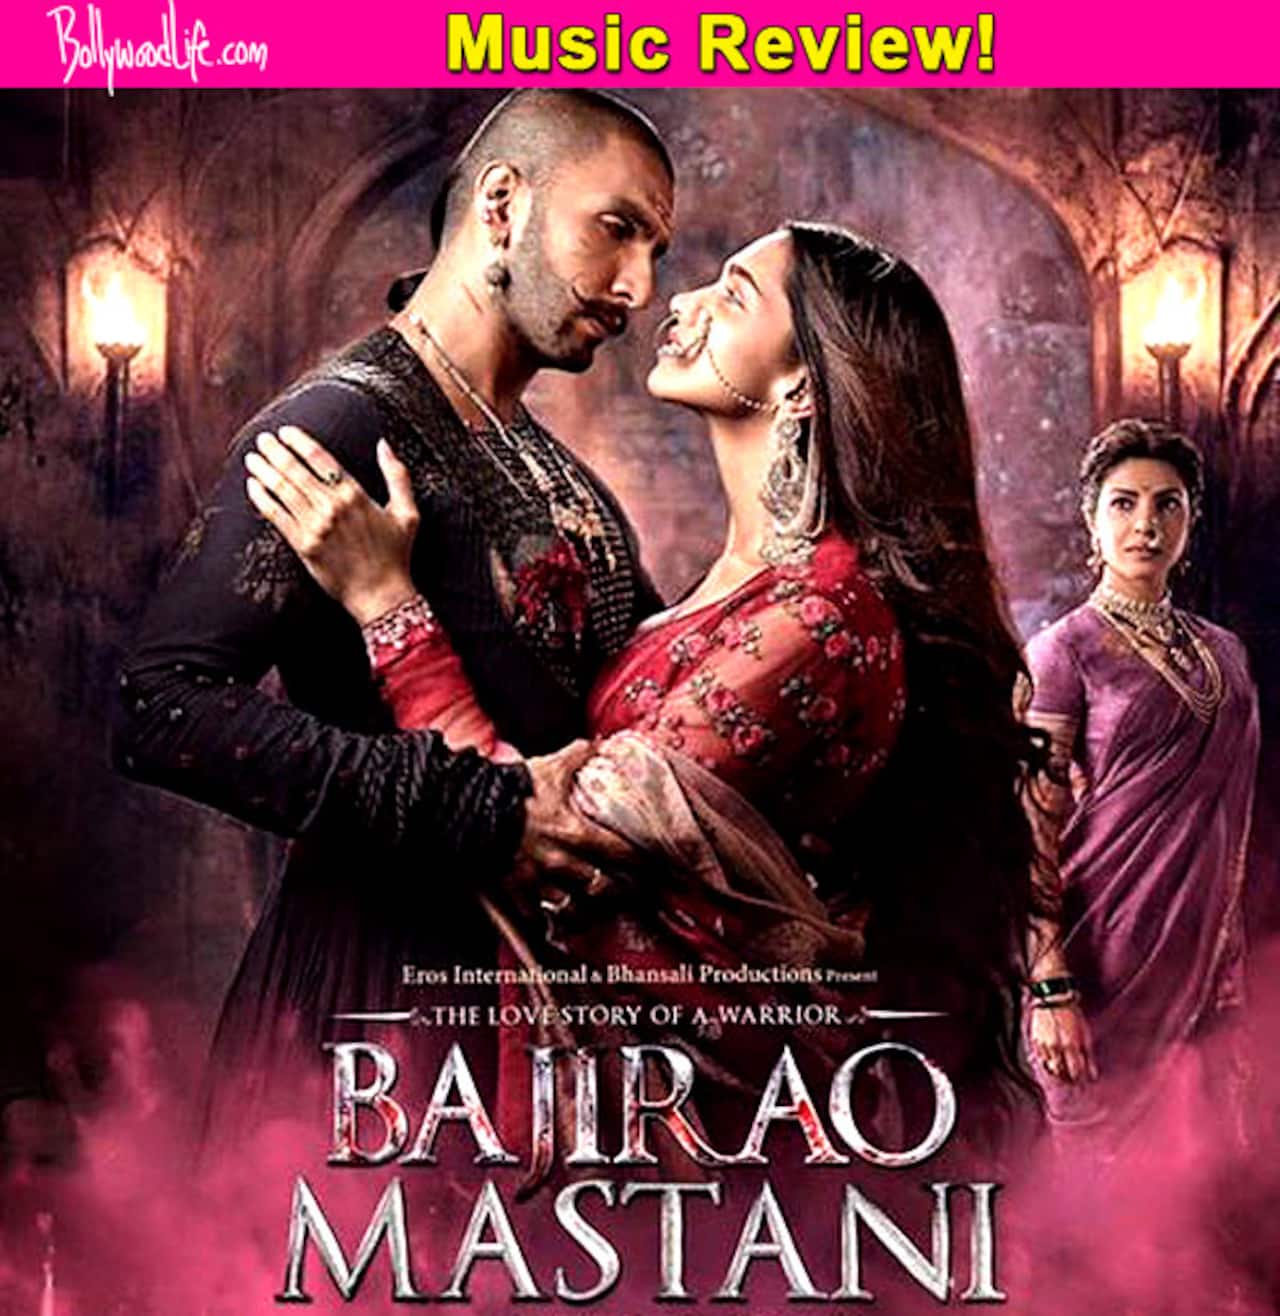 Bajirao Mastani music review: The album for this Ranveer Singh - Deepika Padukone - Priyanka Chopra's historical romance has the RIGHT touch of class and elegance!